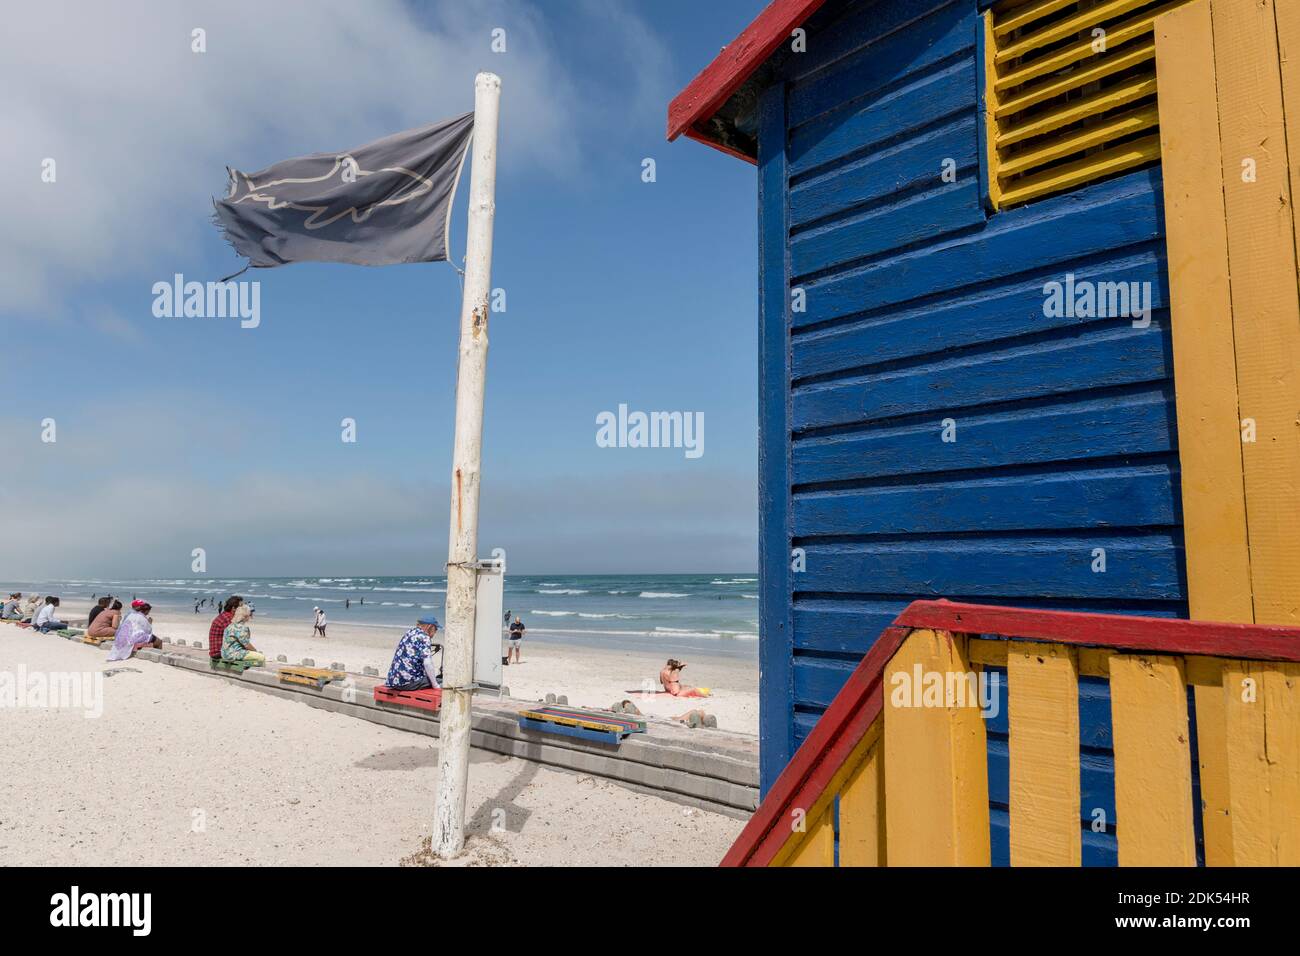 A black shark warning flag flies over Muizenberg beach, Cape Town, South Africa. The black flag indicates that shark spotting conditions are poor. Stock Photo